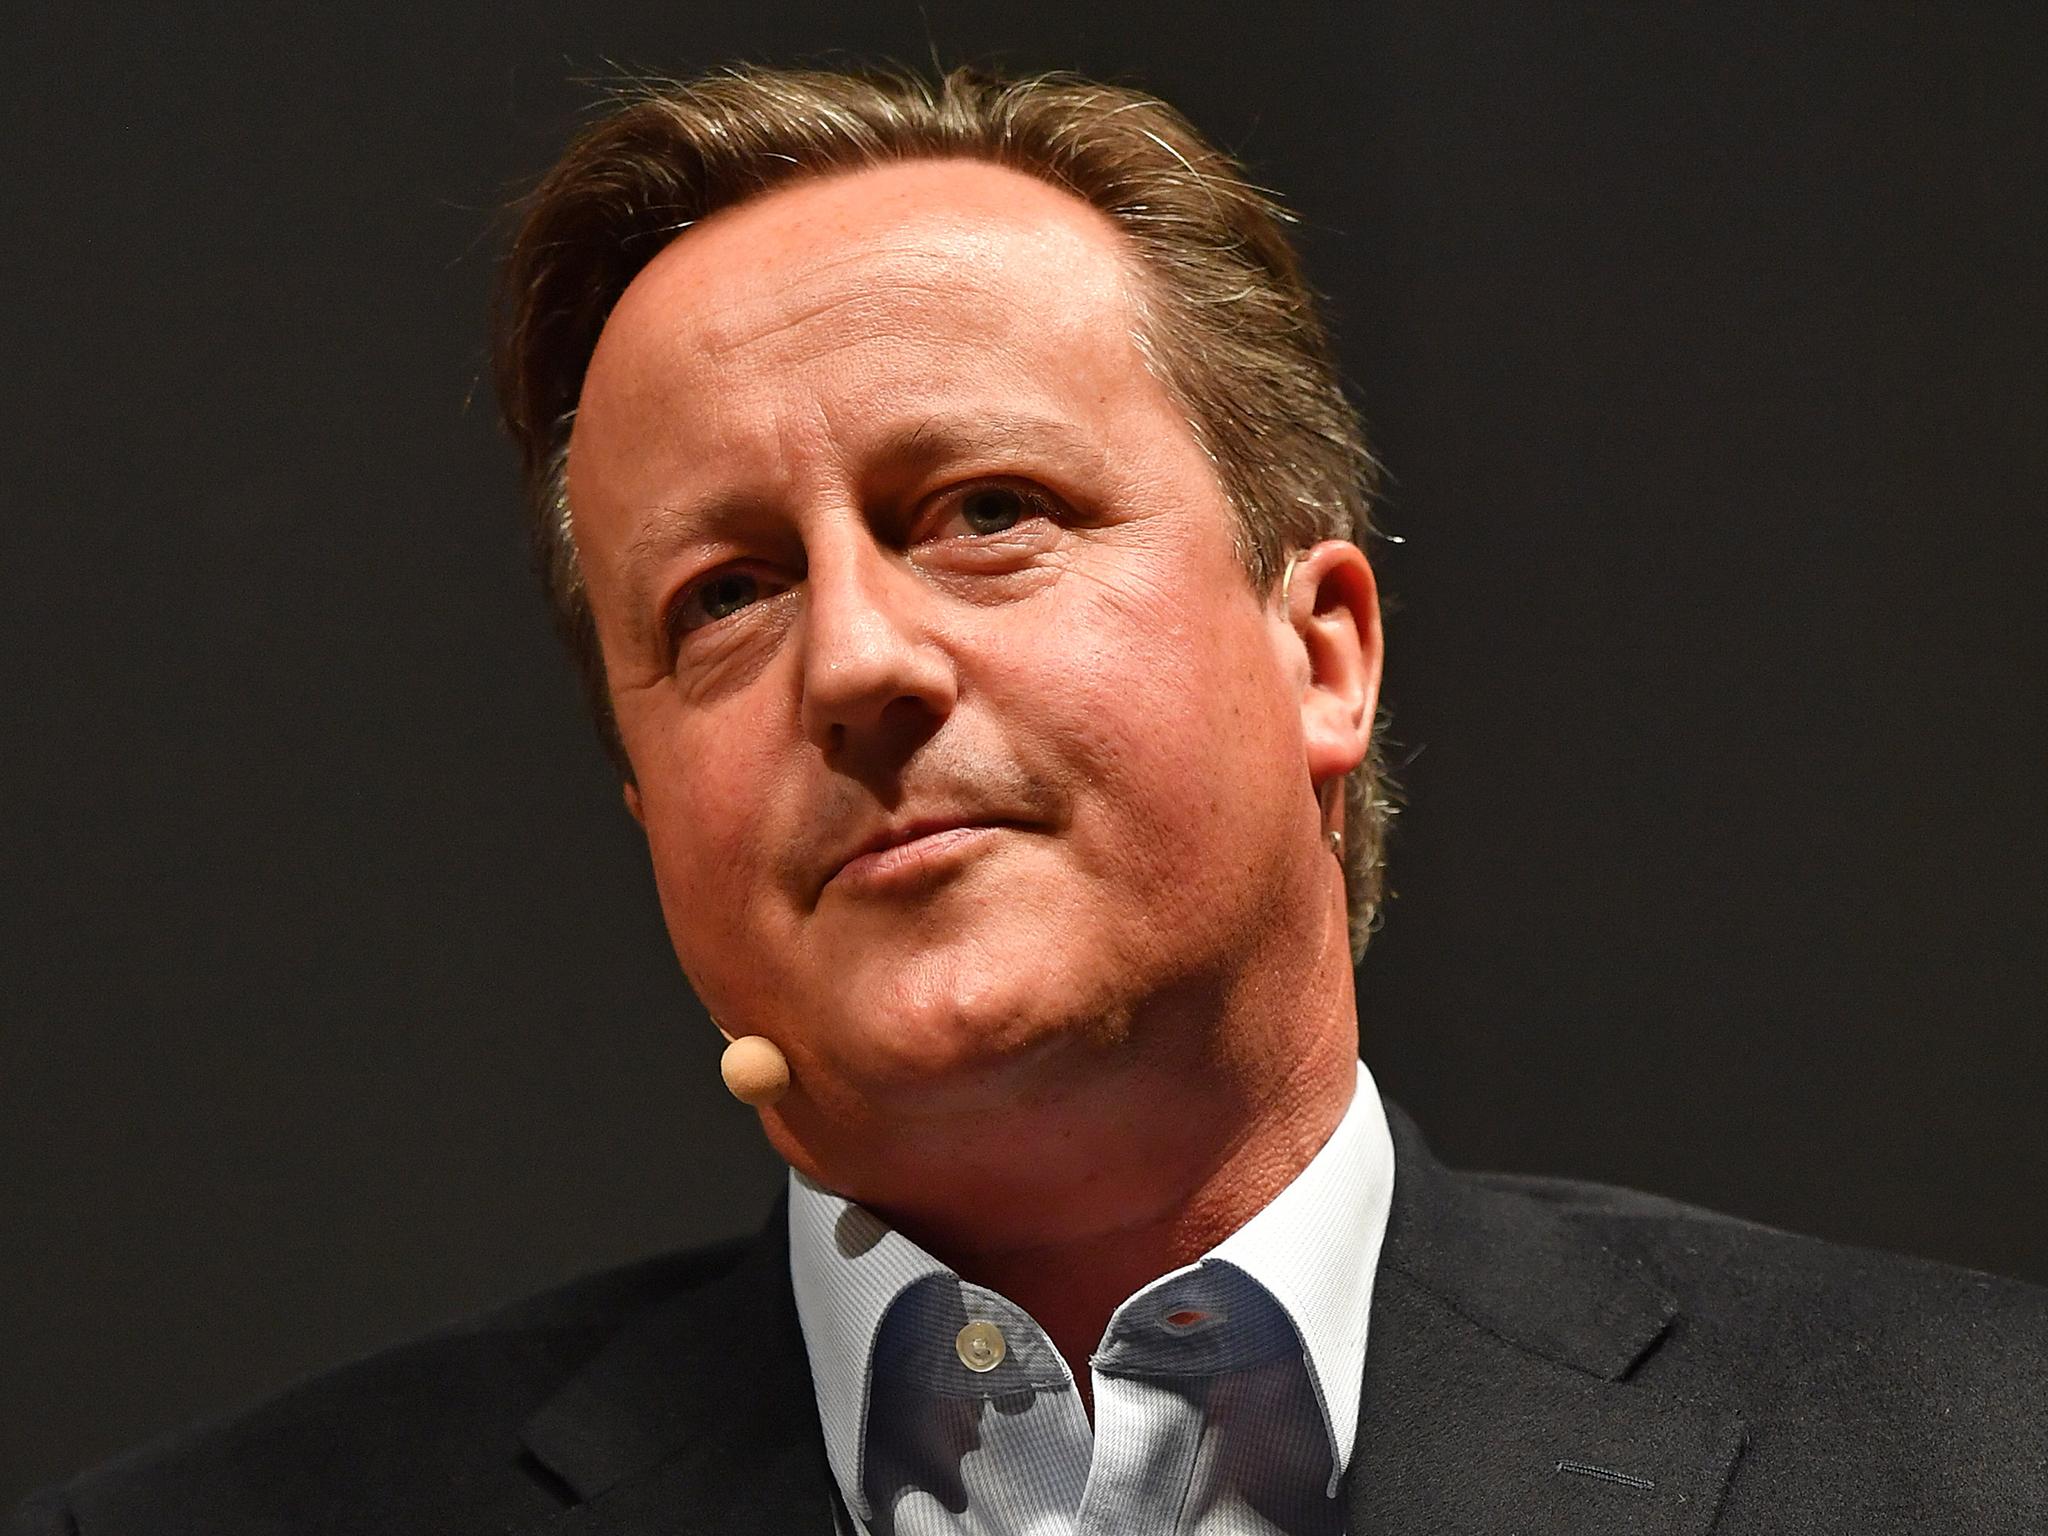 Former prime minister David Cameron has come under intense scrutiny over his lobbying efforts for Greensill Capital